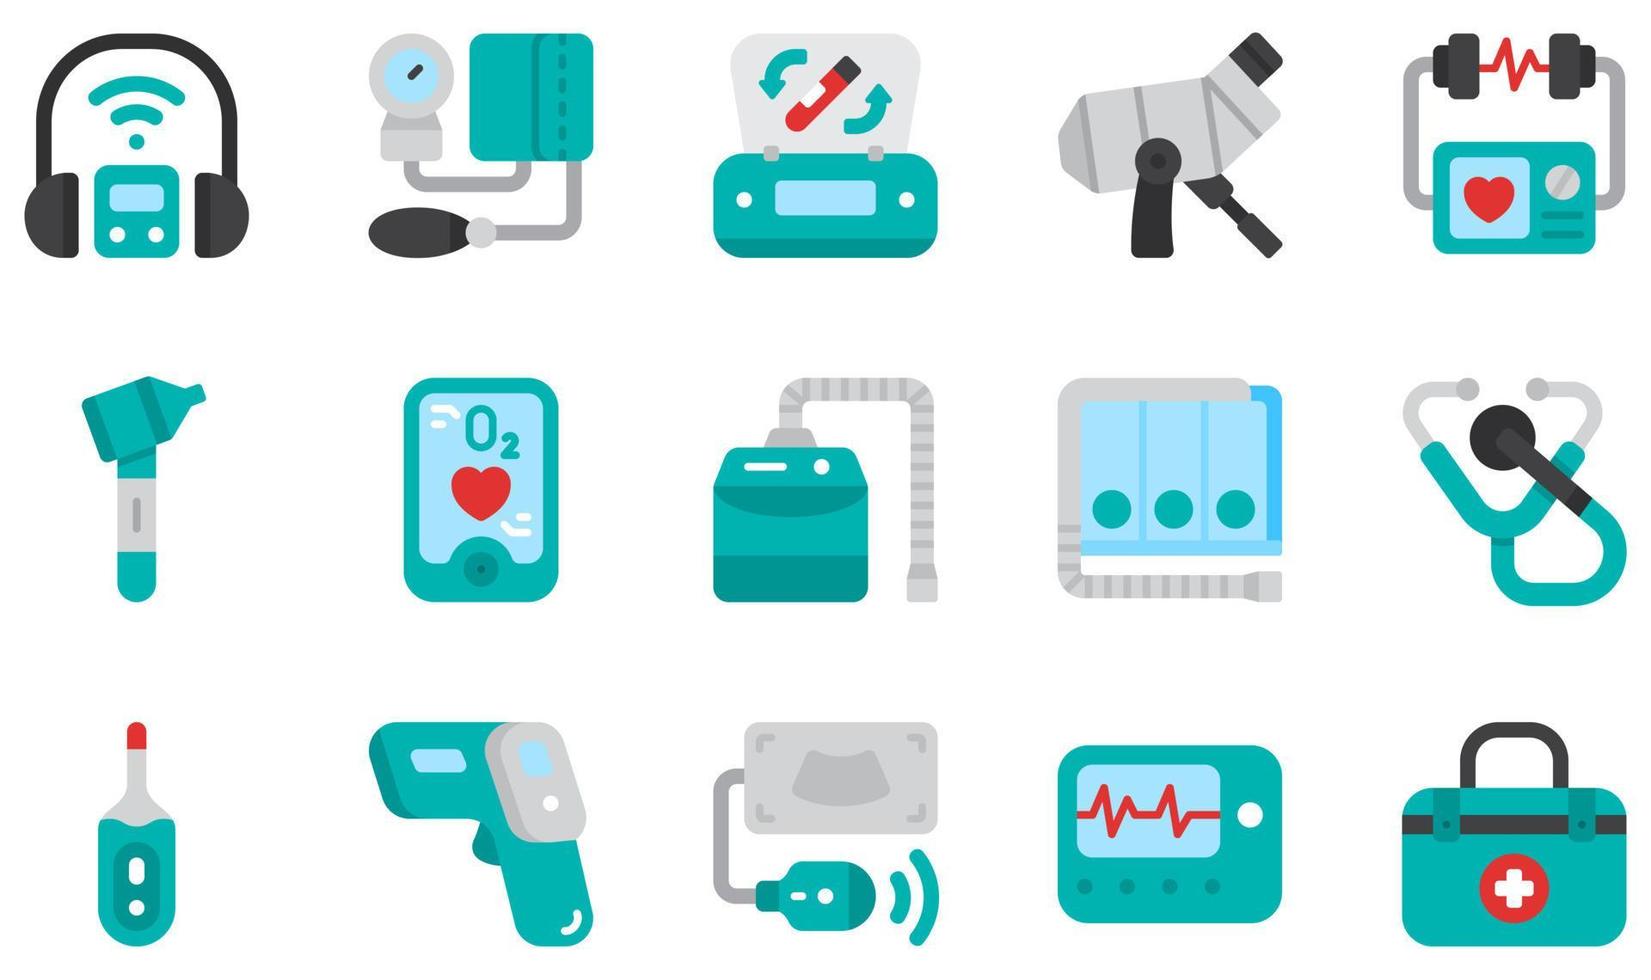 Set of Vector Icons Related to Medical Equipment. Contains such Icons as Audiometer, Blood Pressure, Centrifuge, Colposcope, Defibrillator, Otoscope and more.